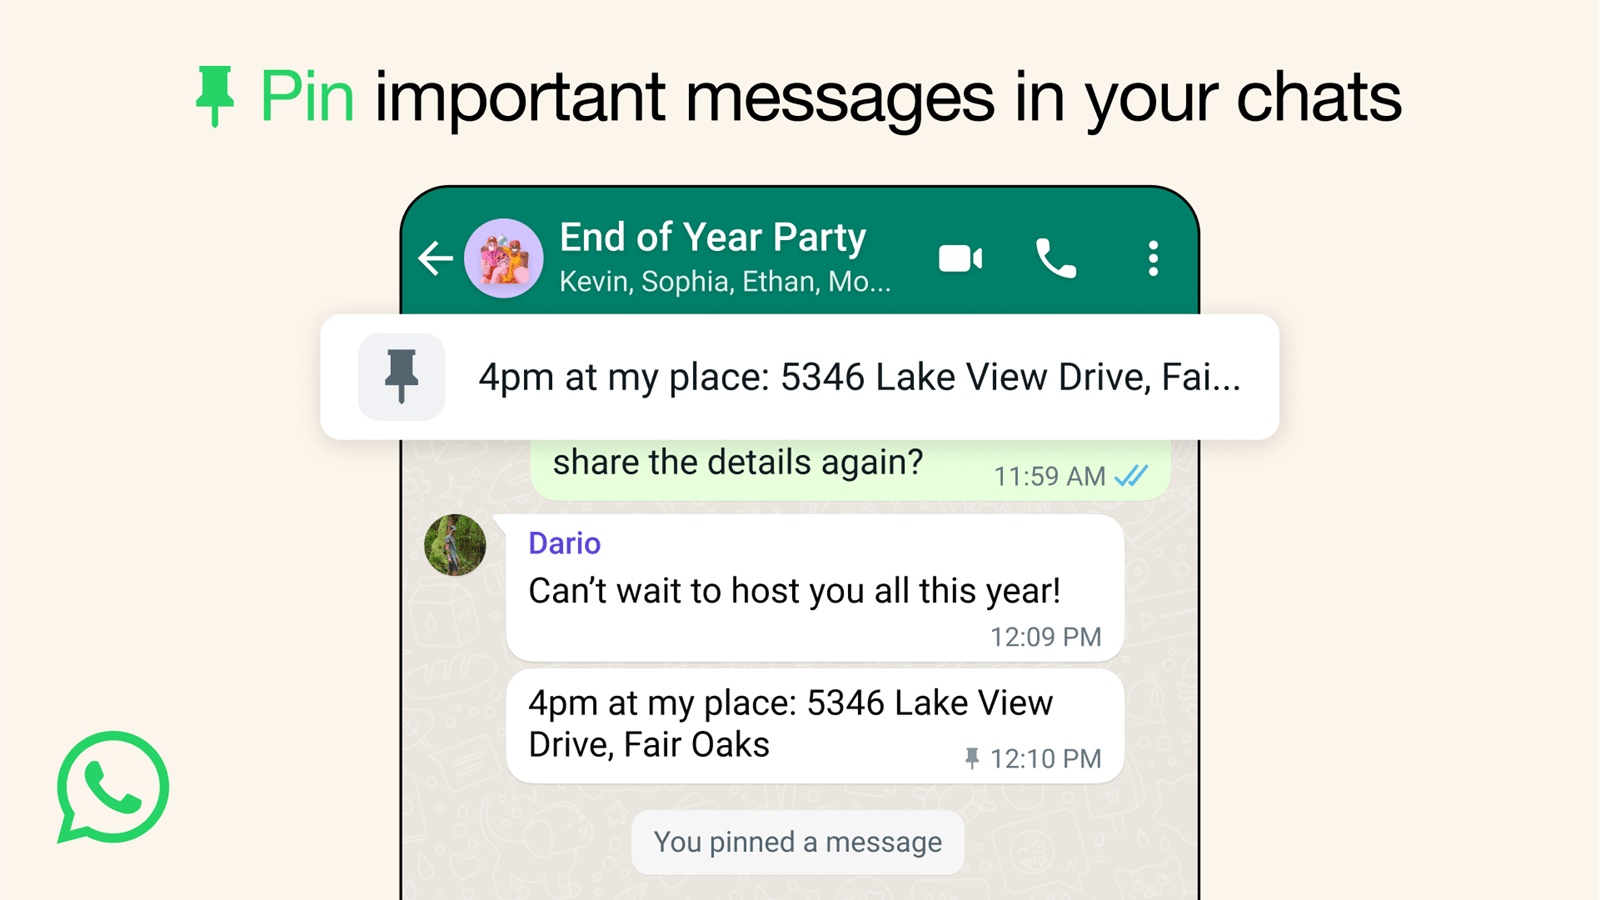 Now WhatsApp users can pin more messages in each chat